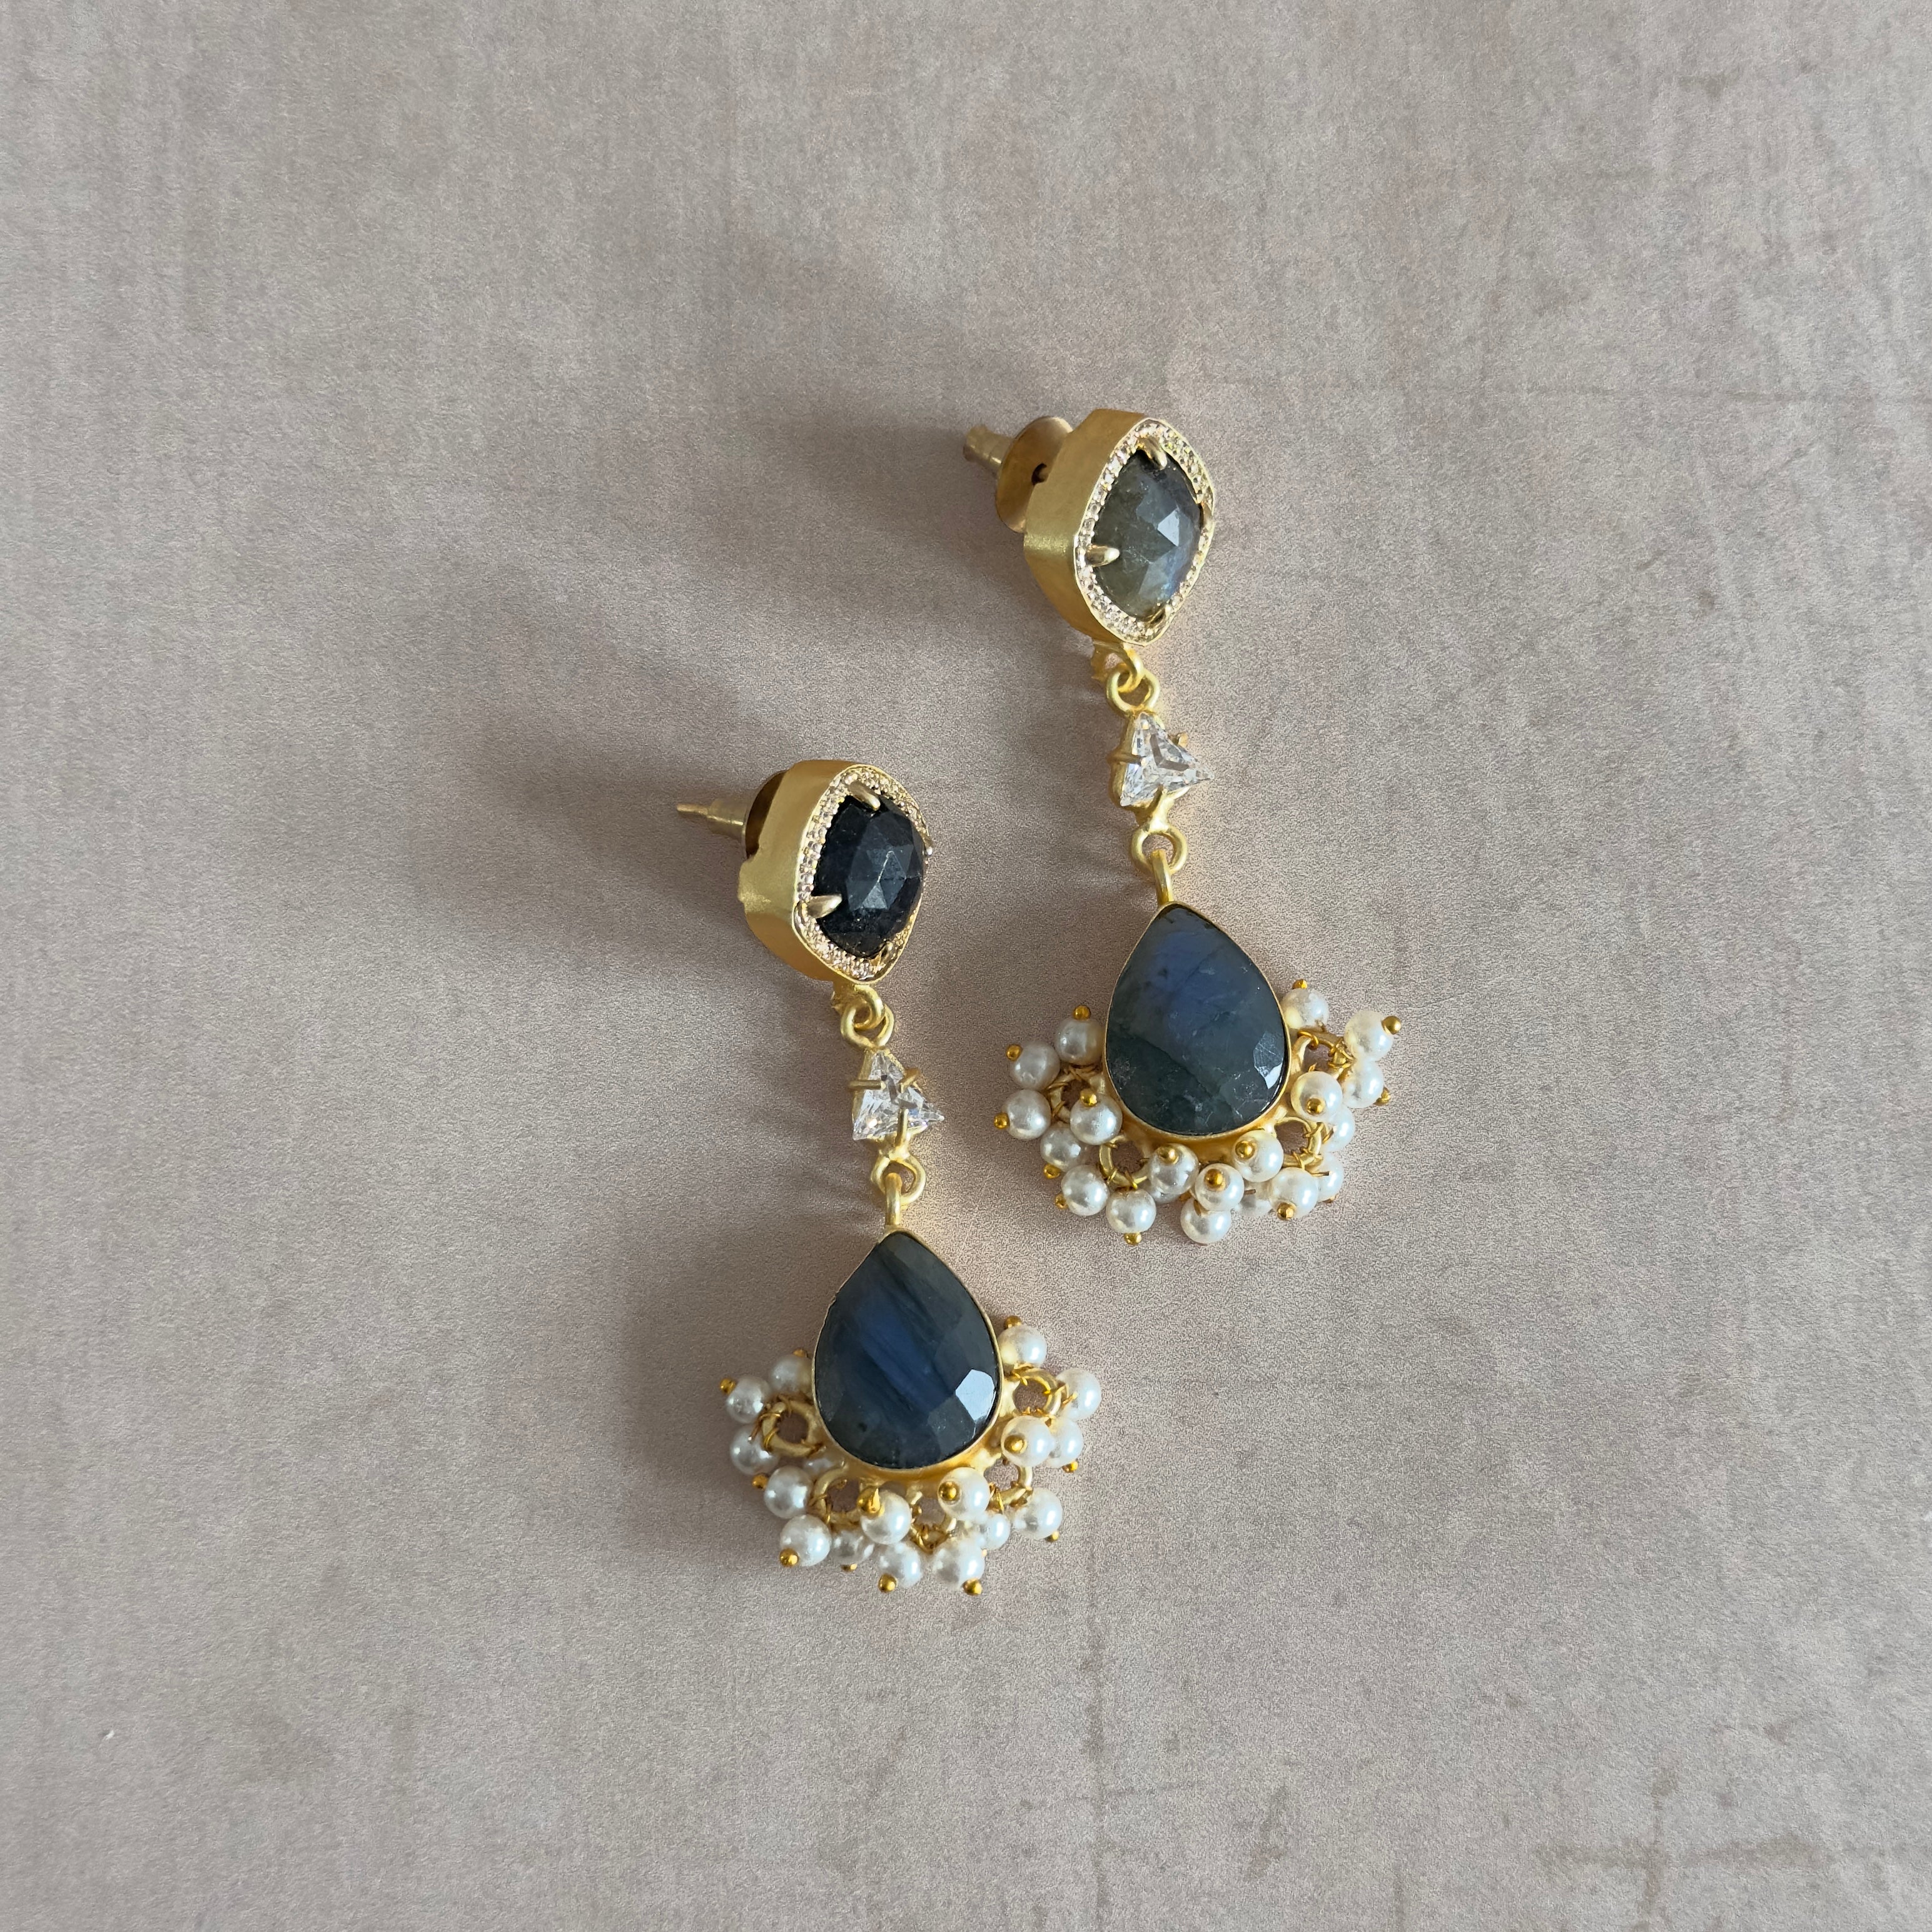 Elevate any look with these Sarah Crystal Drop Earrings, featuring lustrous labradorite stones and a dazzling cubic zirconia crystal. Add a touch of elegance and sparkle to any outfit.